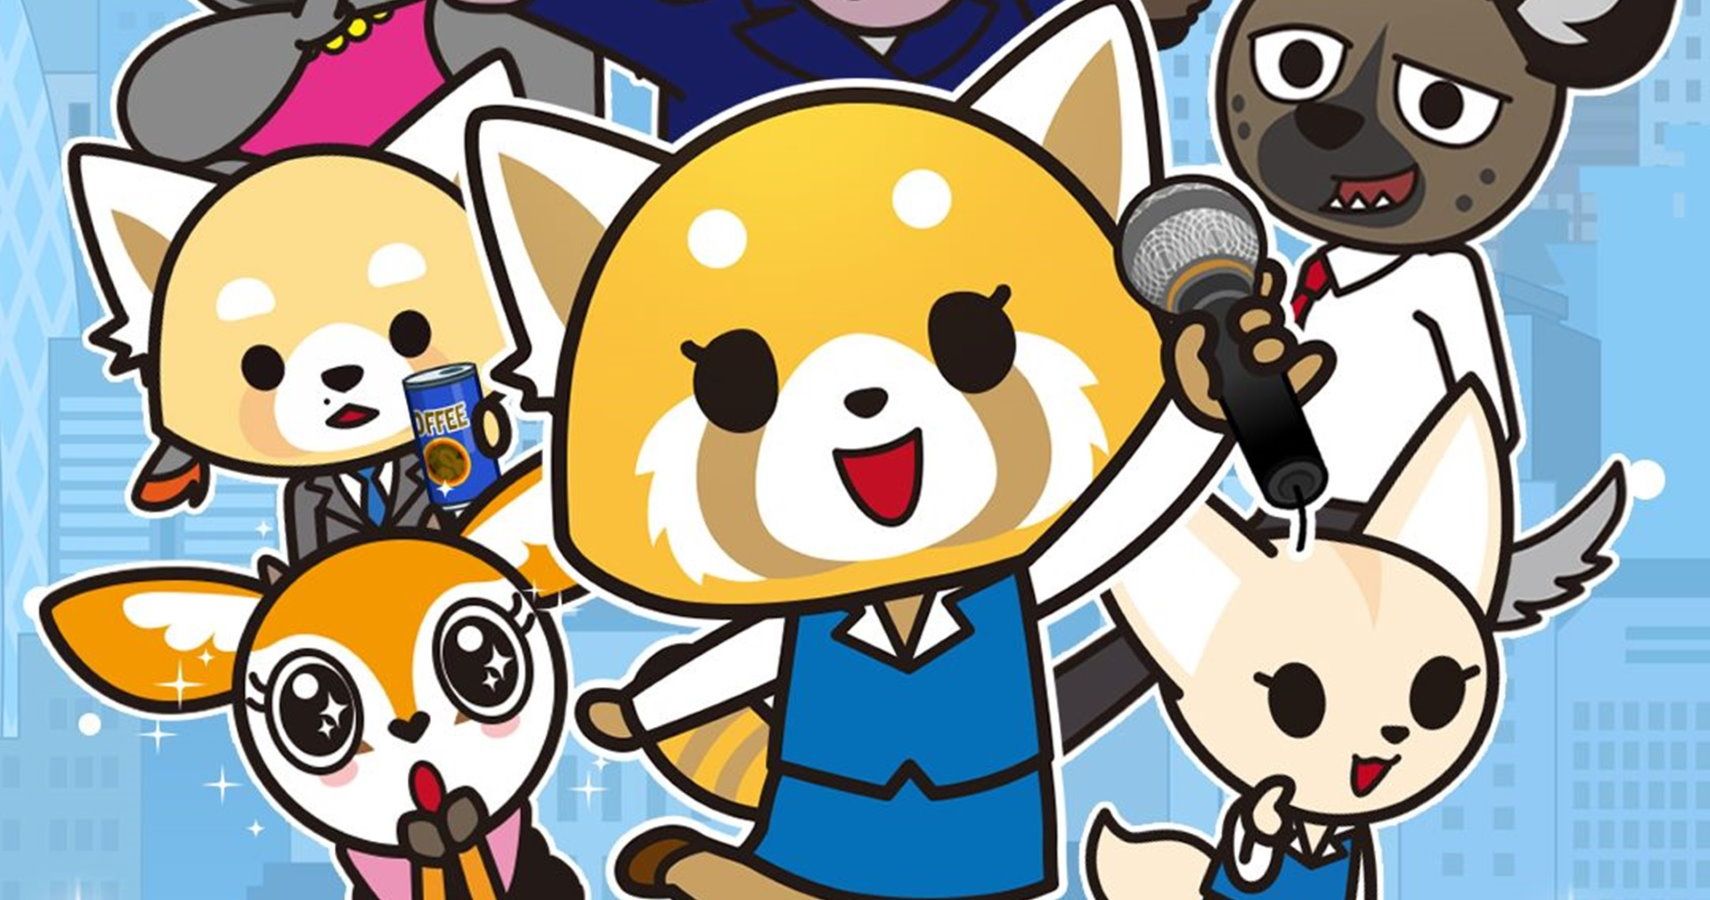 Buy Aggretsuko Anime Stationary Set Anime Accessories Aggretsuko Anime Gift  Online at Lowest Price Ever in India | Check Reviews & Ratings - Shop The  World